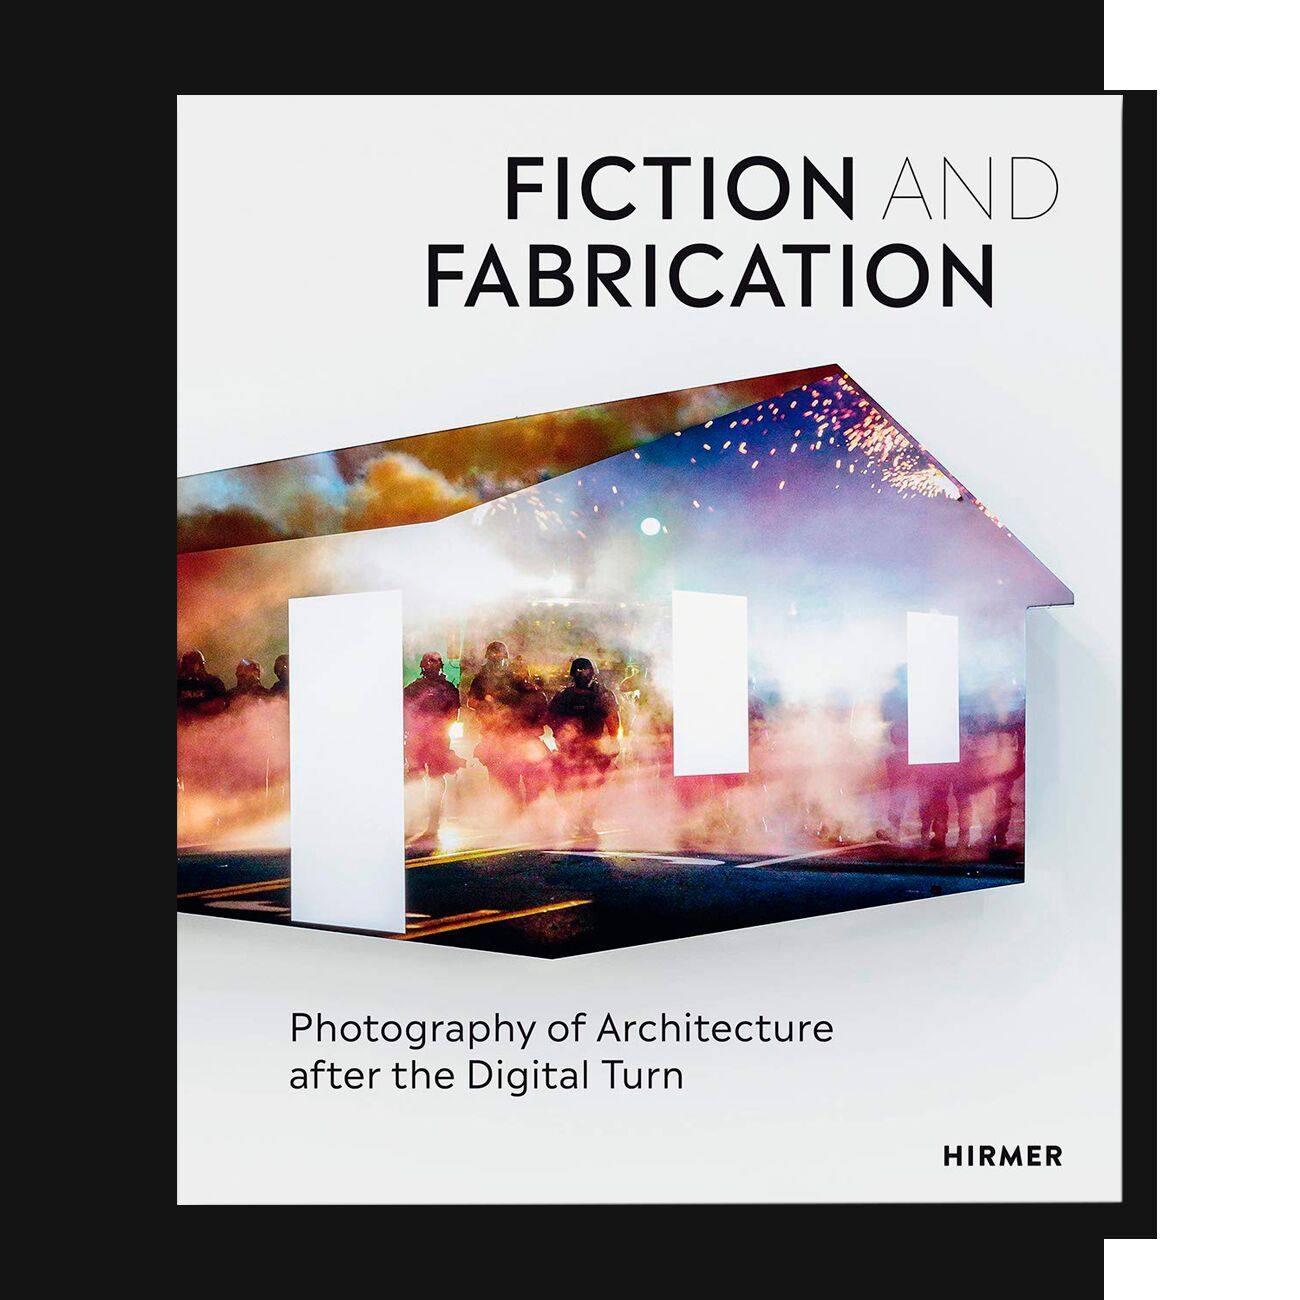 Fiction and Fabrication: Photography of Architecture after the Digital Turn